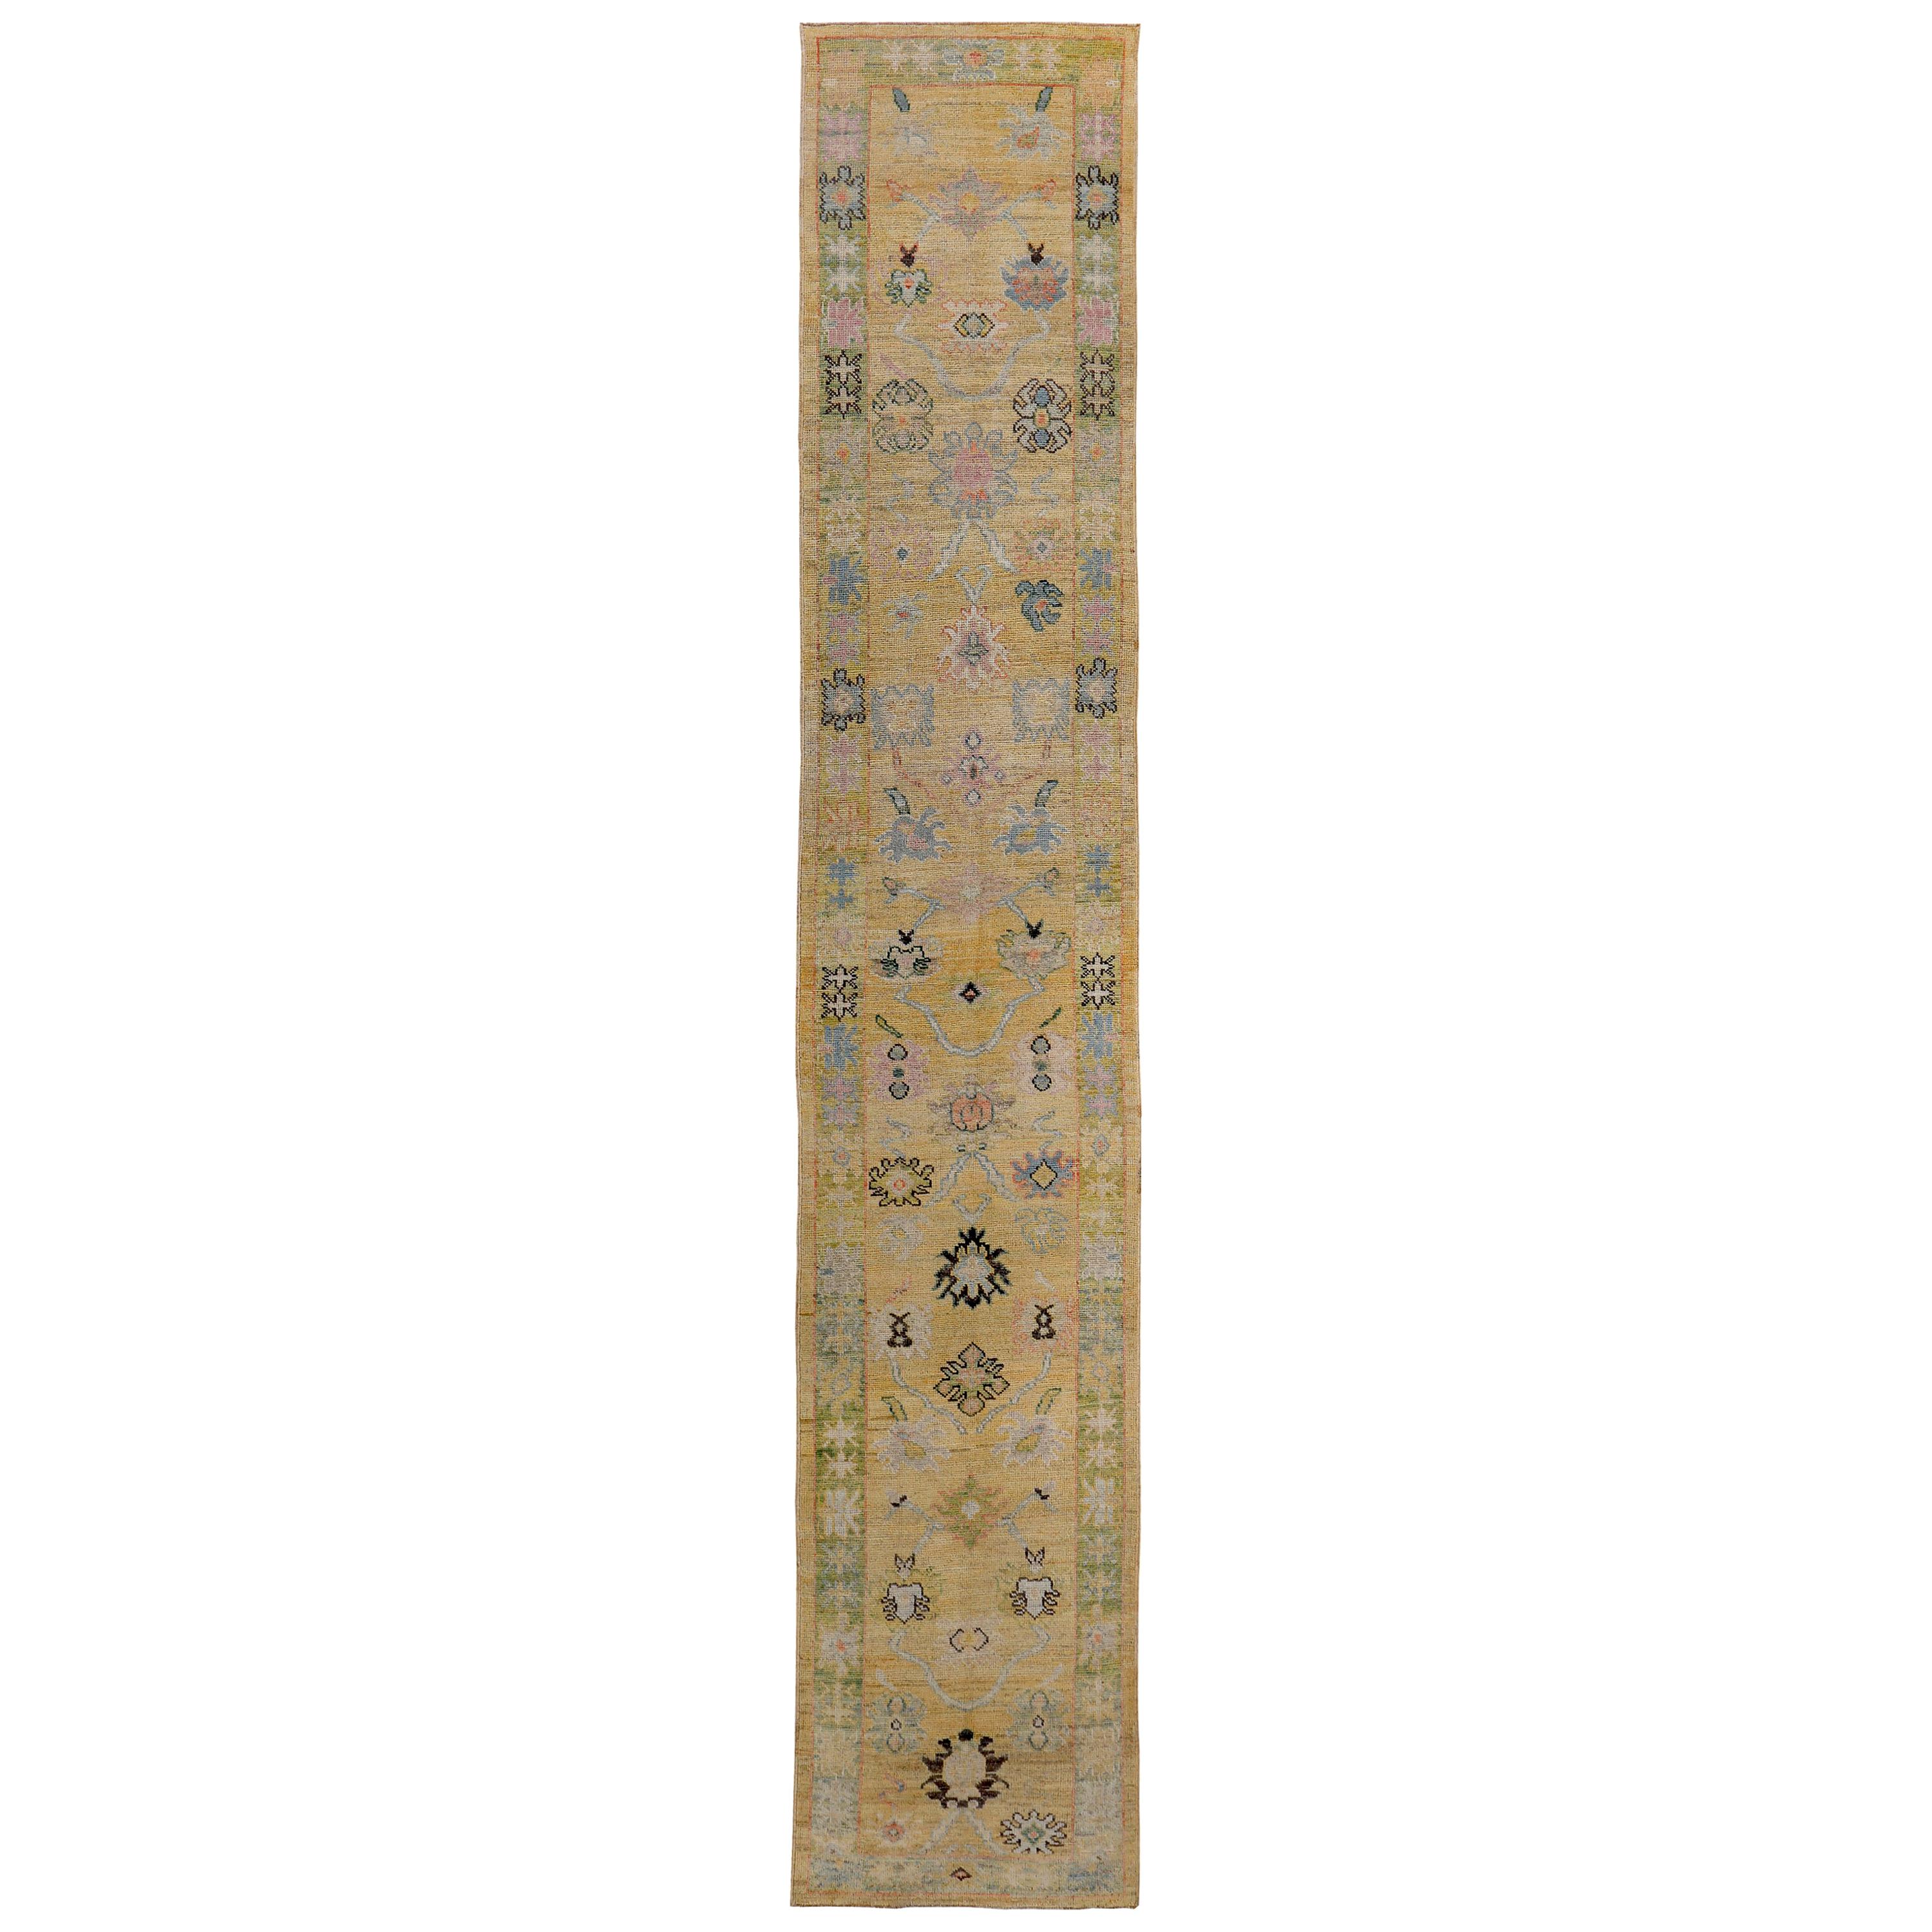 Turkish Oushak Runner Rug with Pink and Gray Flower Details on Yellow Field